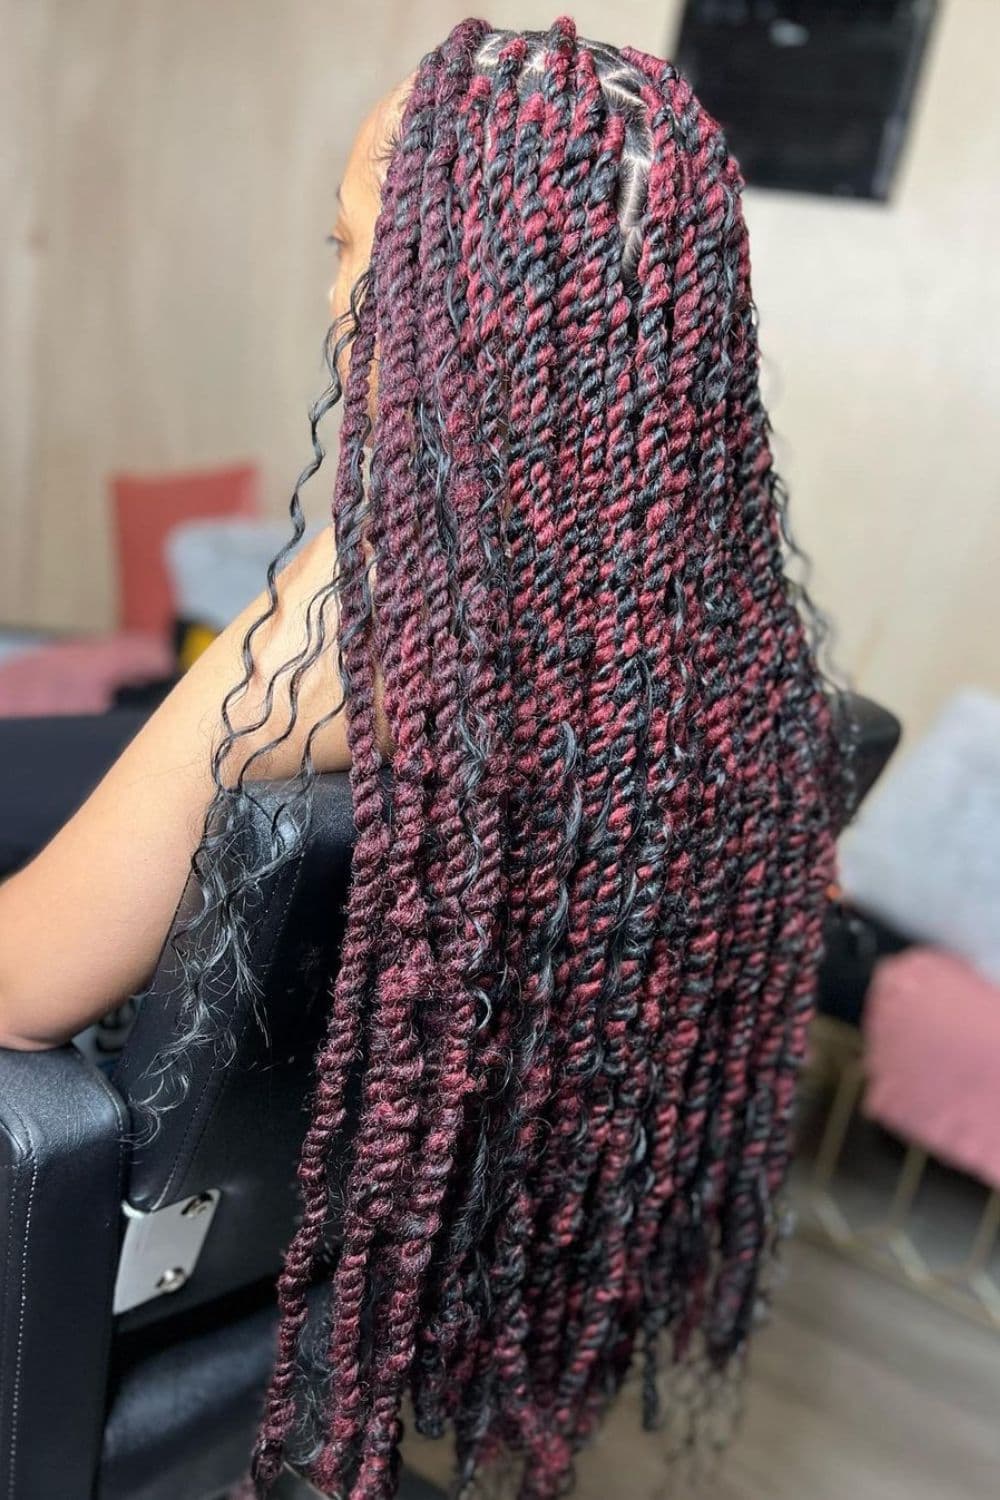 A woman sitting on a chair with black and burgundy Marley twists.